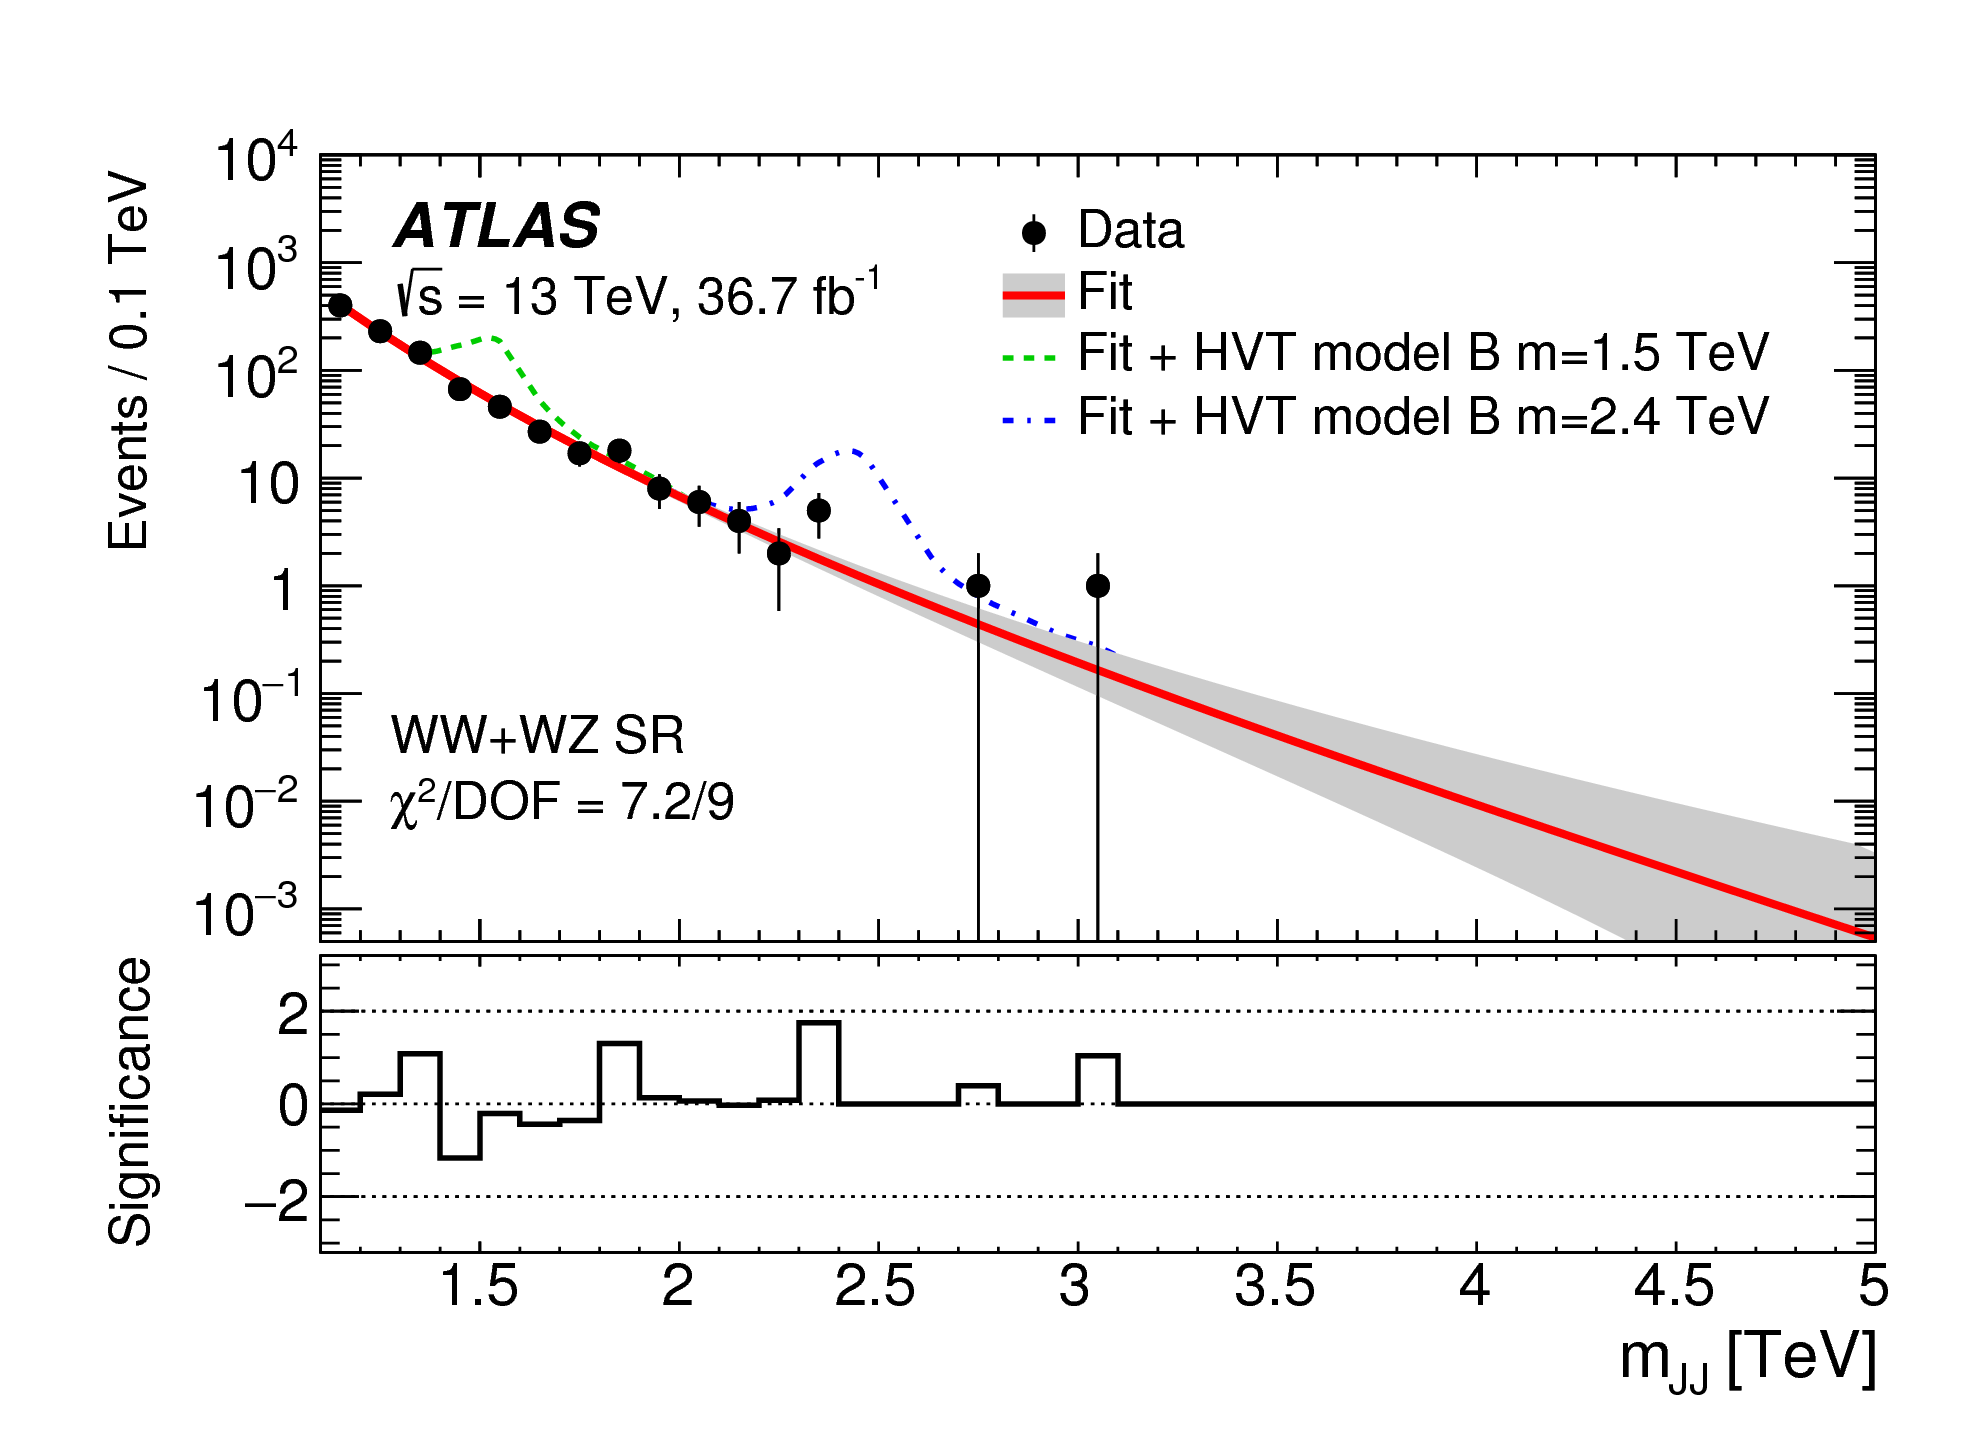 Search for diboson resonances with boson-tagged jets in pp collisions at sqrt(s)=13 TeV with the ATLAS detector